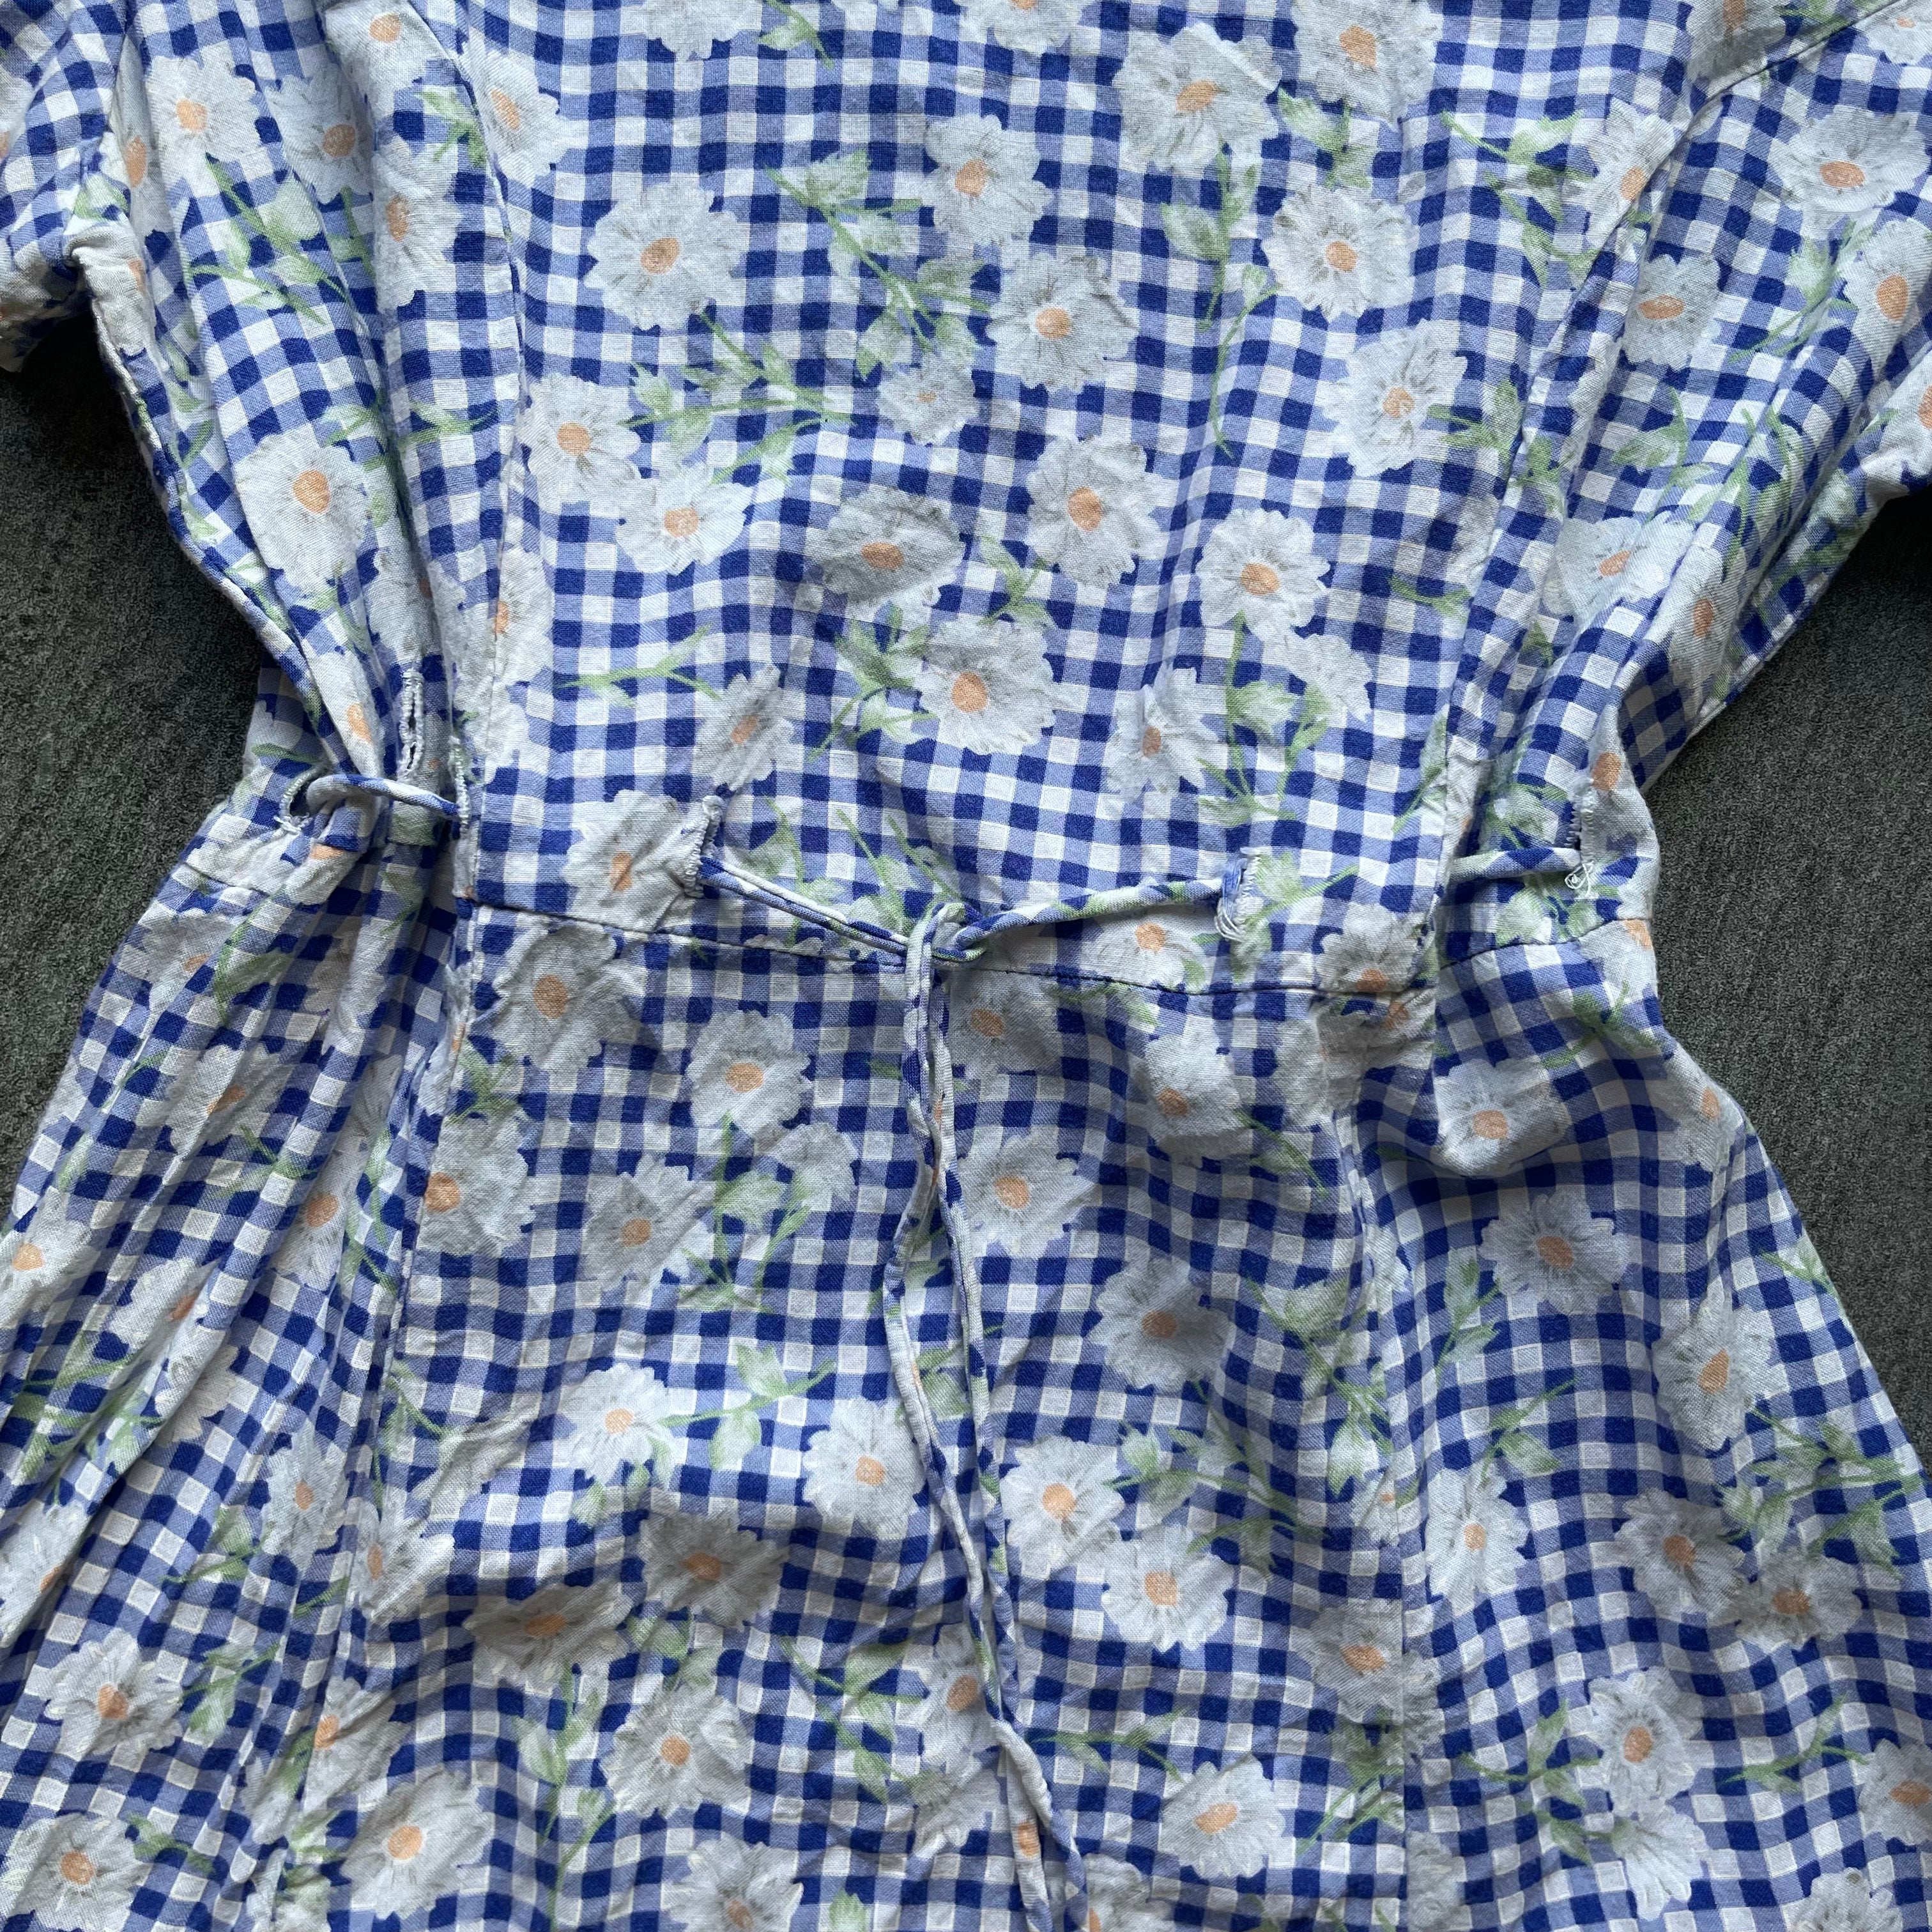 Blue Gingham and Floral Print Dress